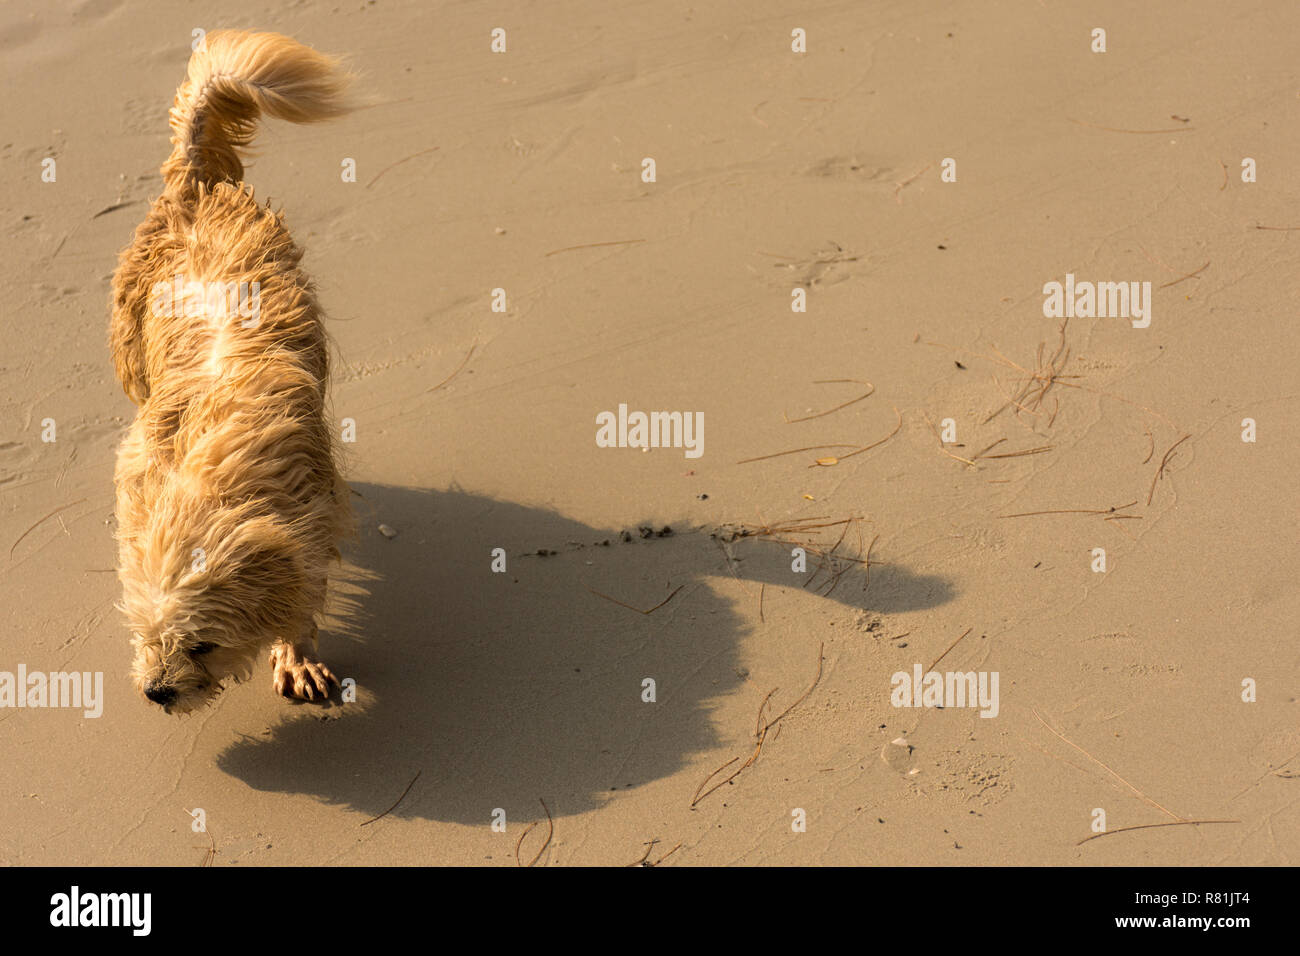 A small furry dog struggles to walk in a straight line along a windy beach. Stock Photo